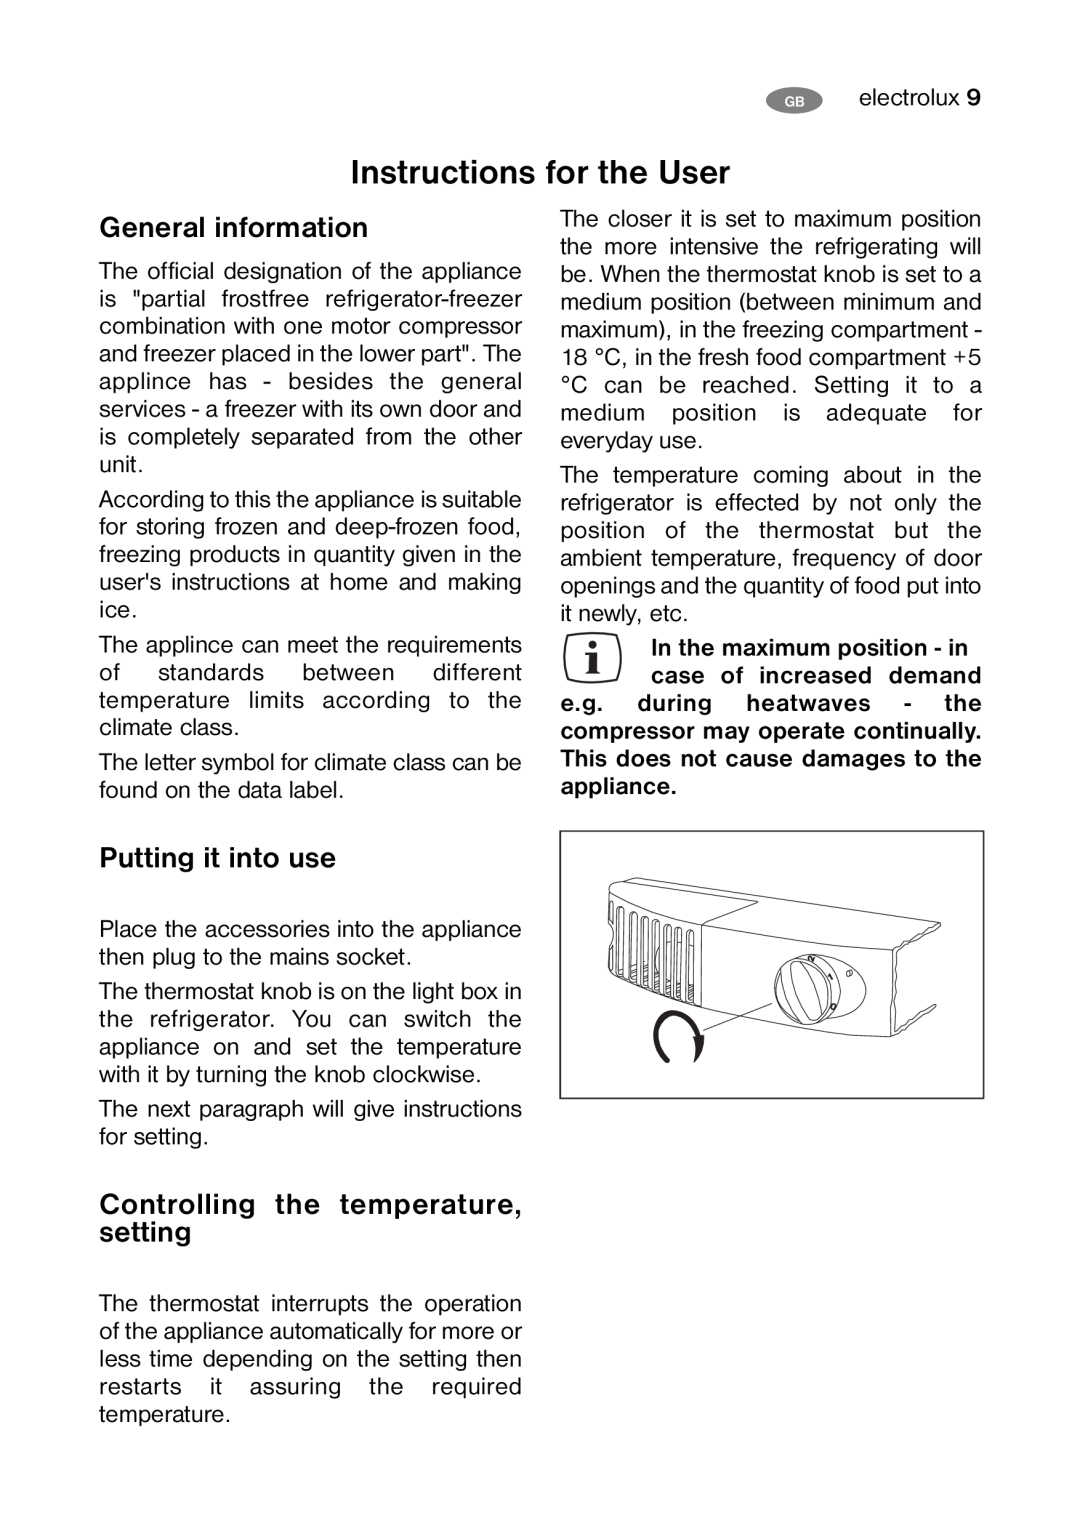 Electrolux ENB34000W user manual Instructions for the User, General information, Putting it into use 